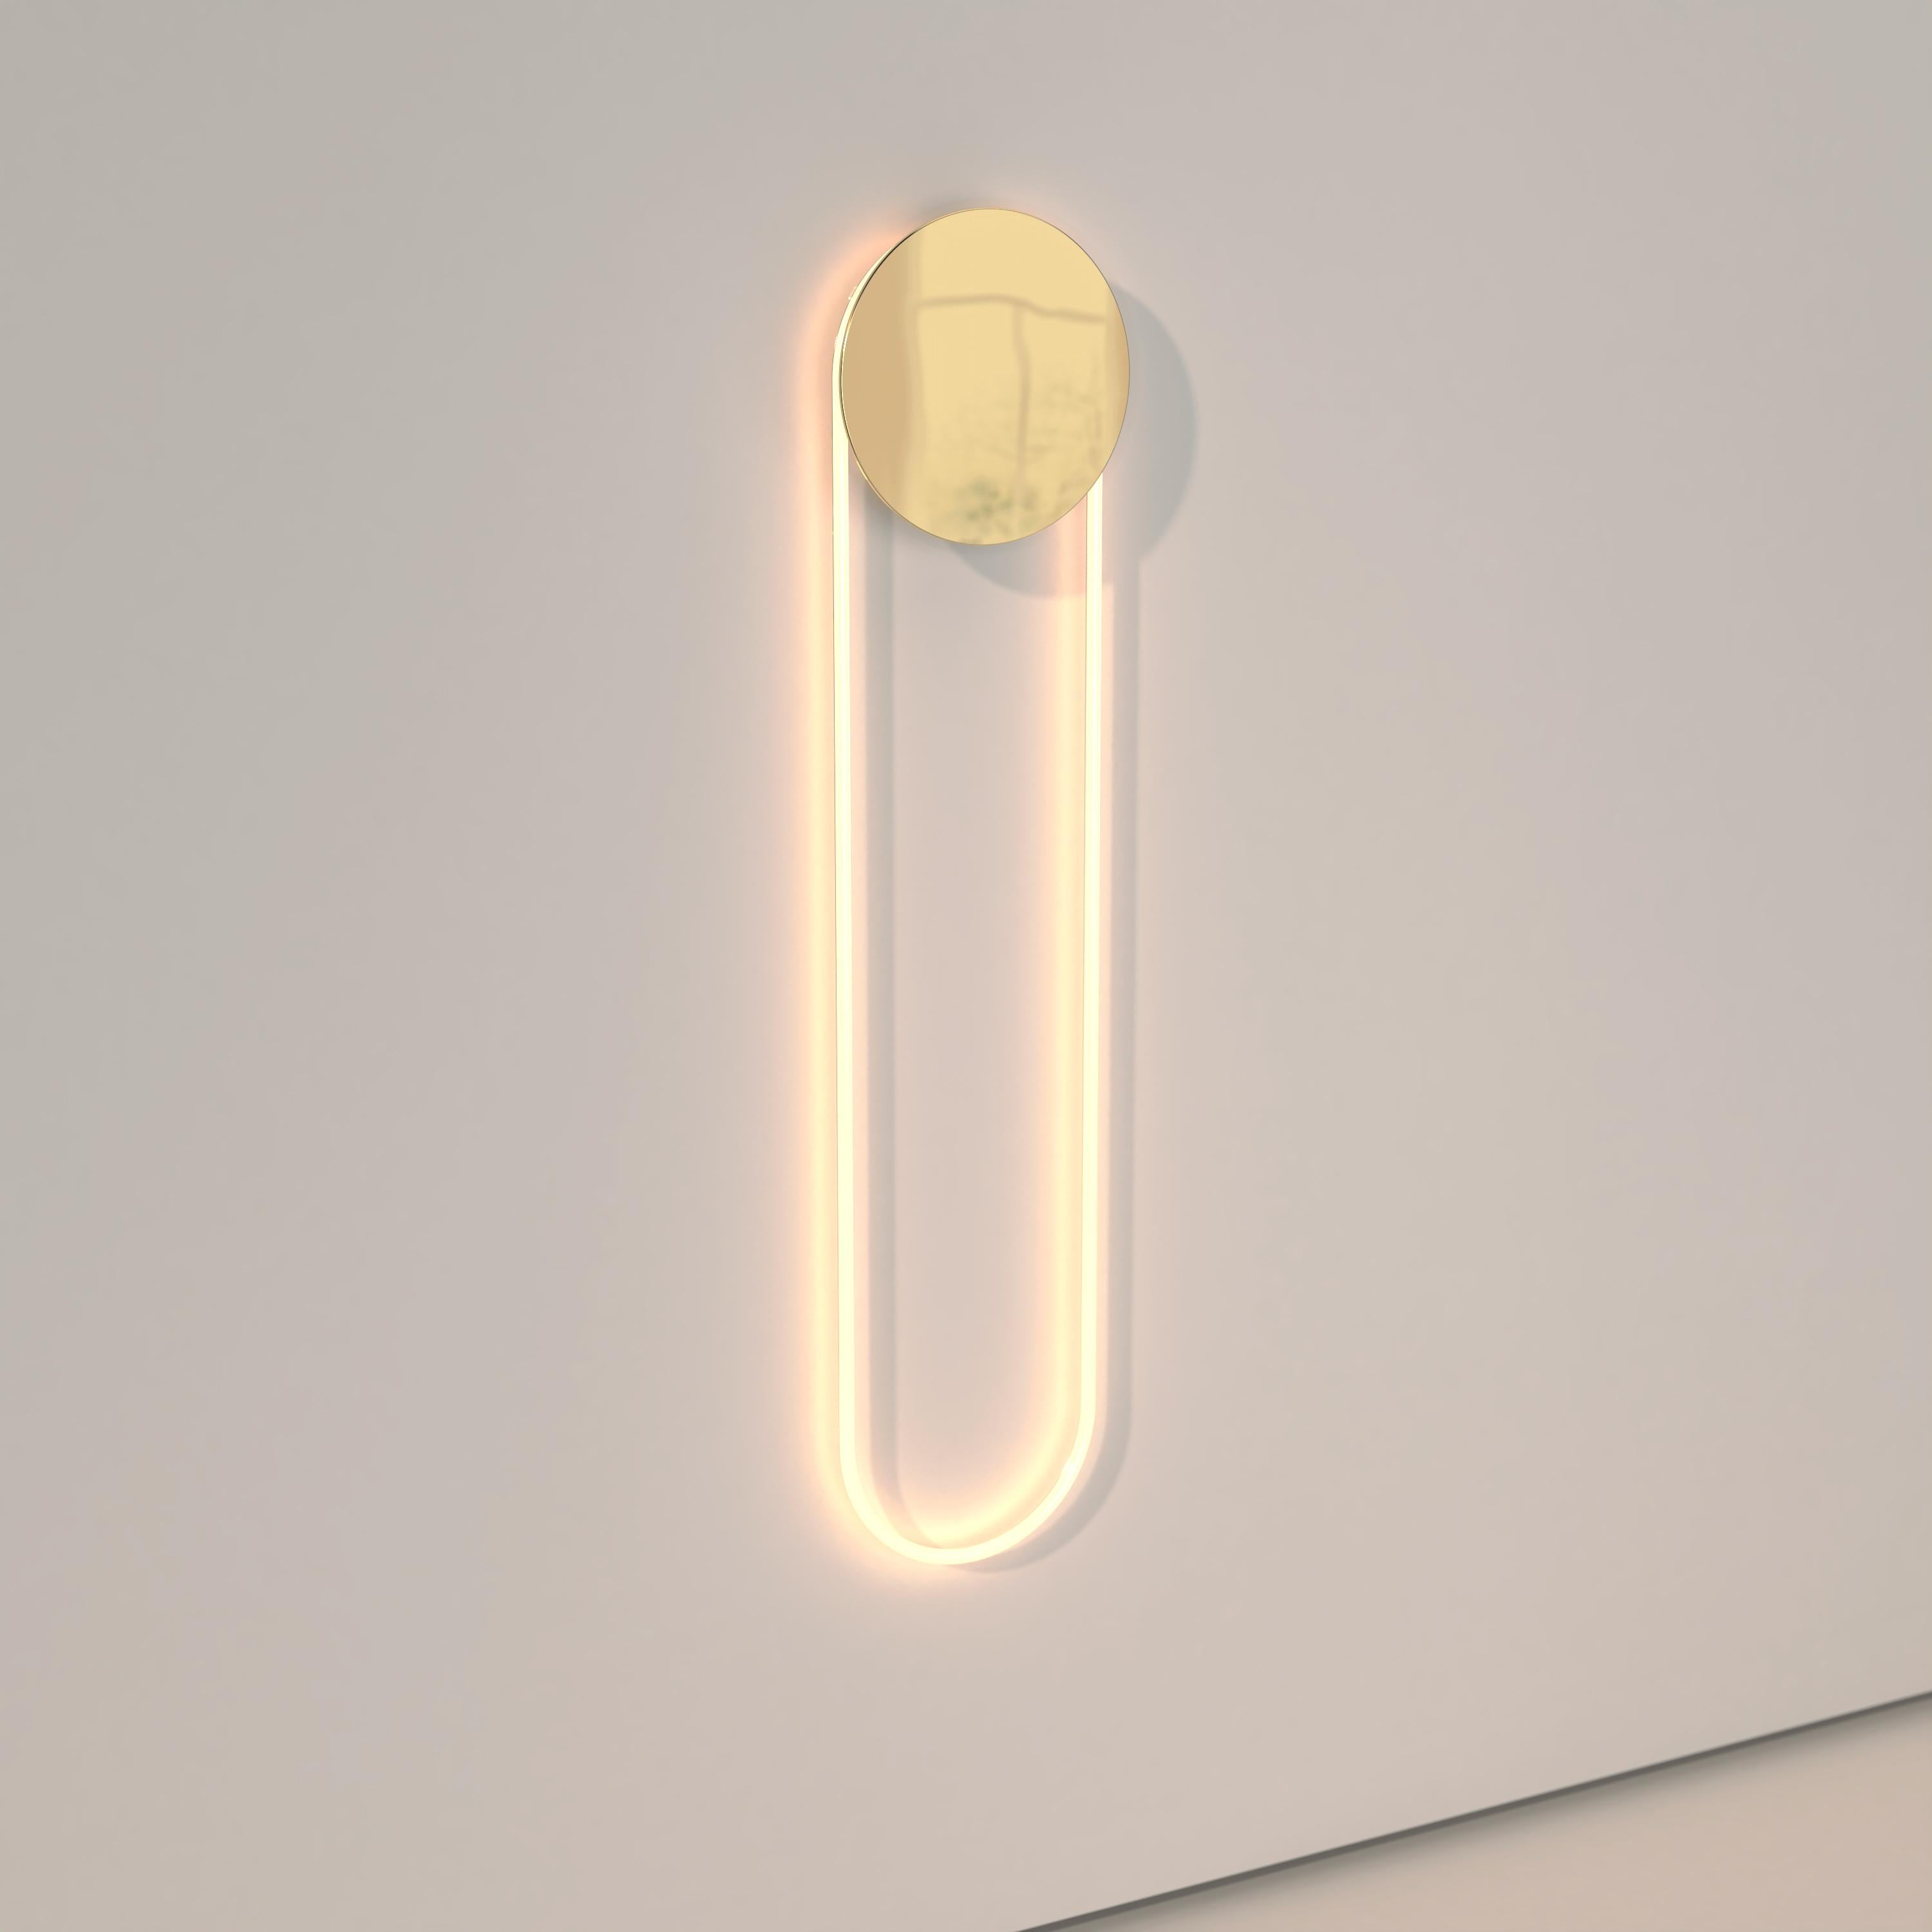 The Ra Wall is a modern and hypnotic wall sconce lighting made with a cold cathode neon and a circular disc available in diverse finishes.

RA Wall participates in its surroundings by playing with contrasts, shadows and reflections. The circular